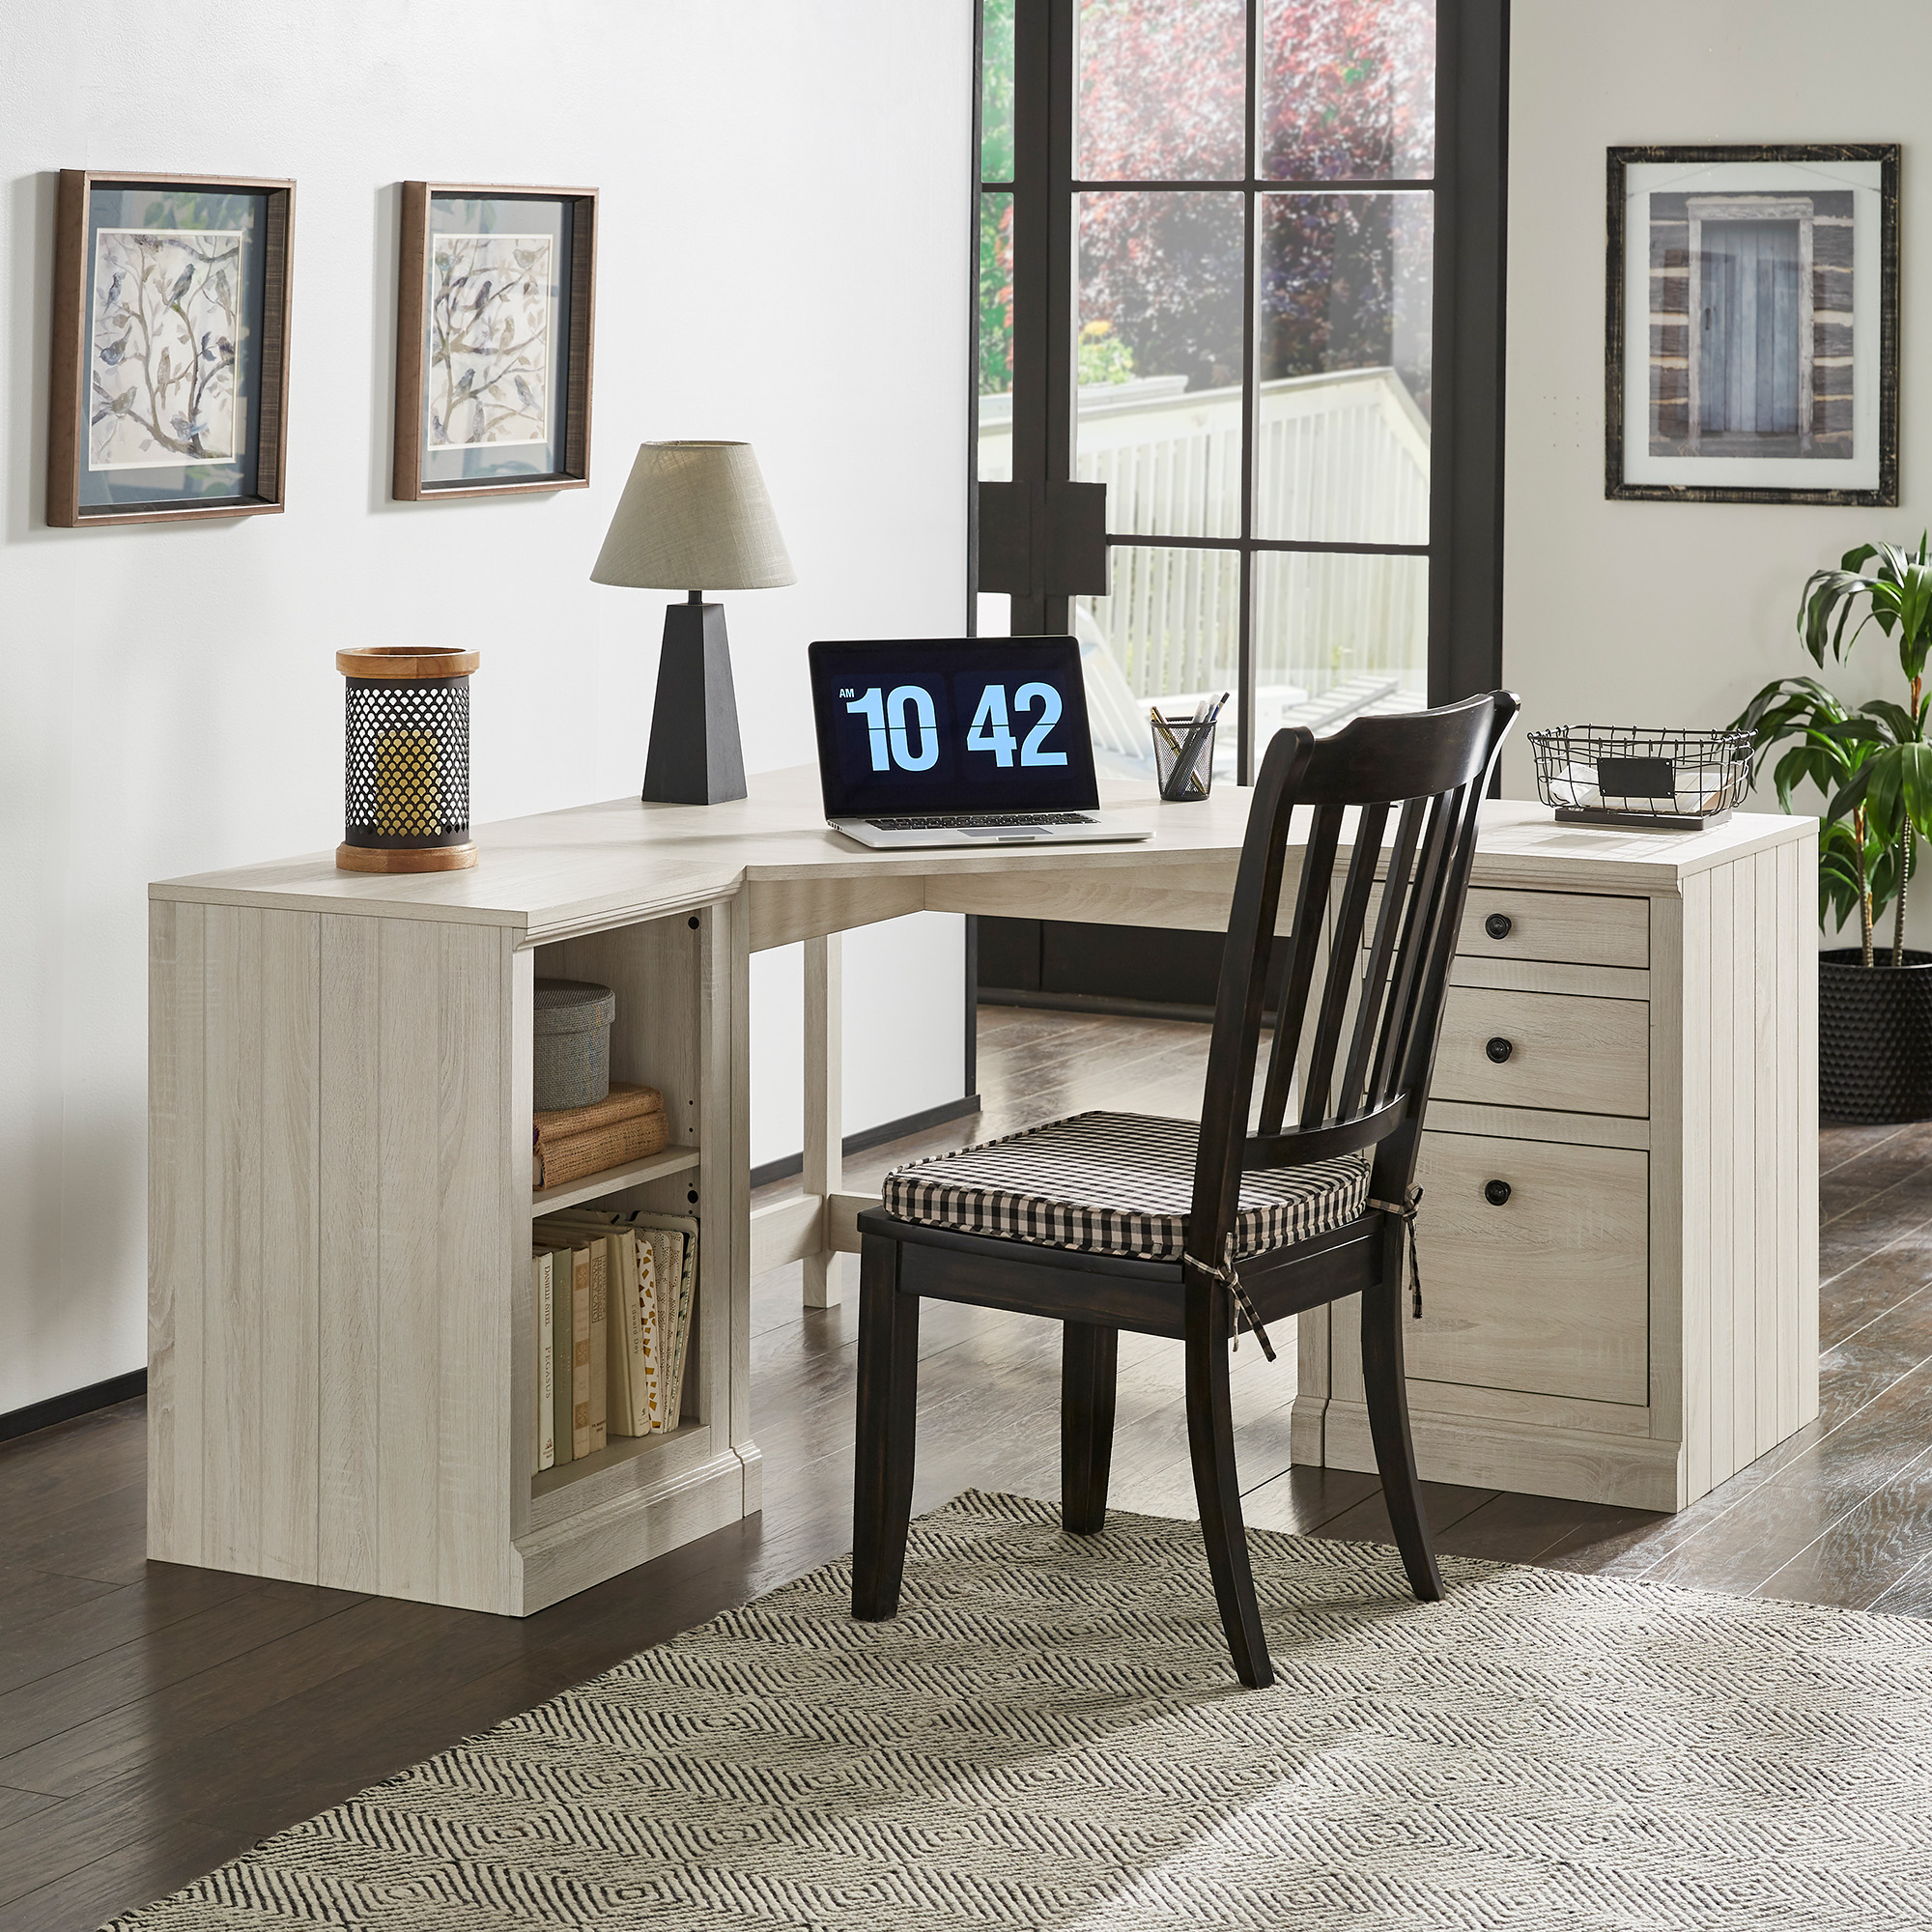 40 in. Corner Desk with USB Chargers and 3-drawer File Cabinet